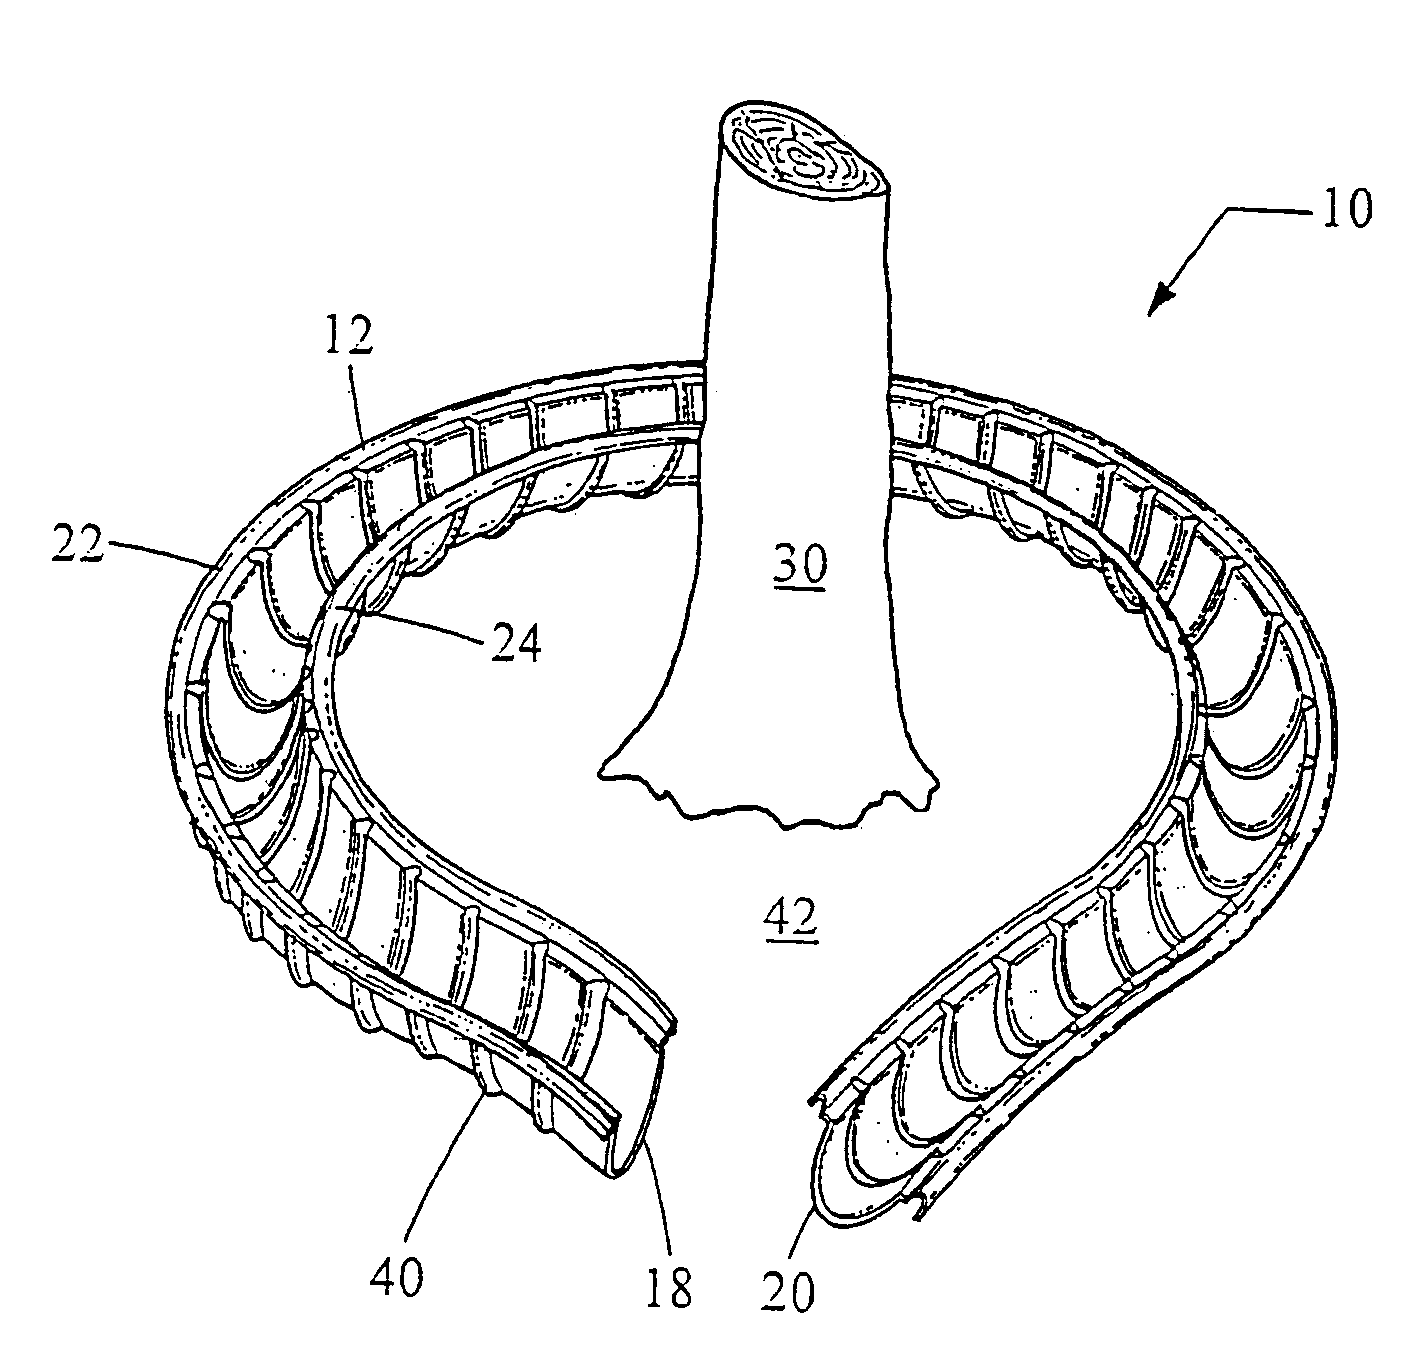 Planting receptacle assembly and a method for planting